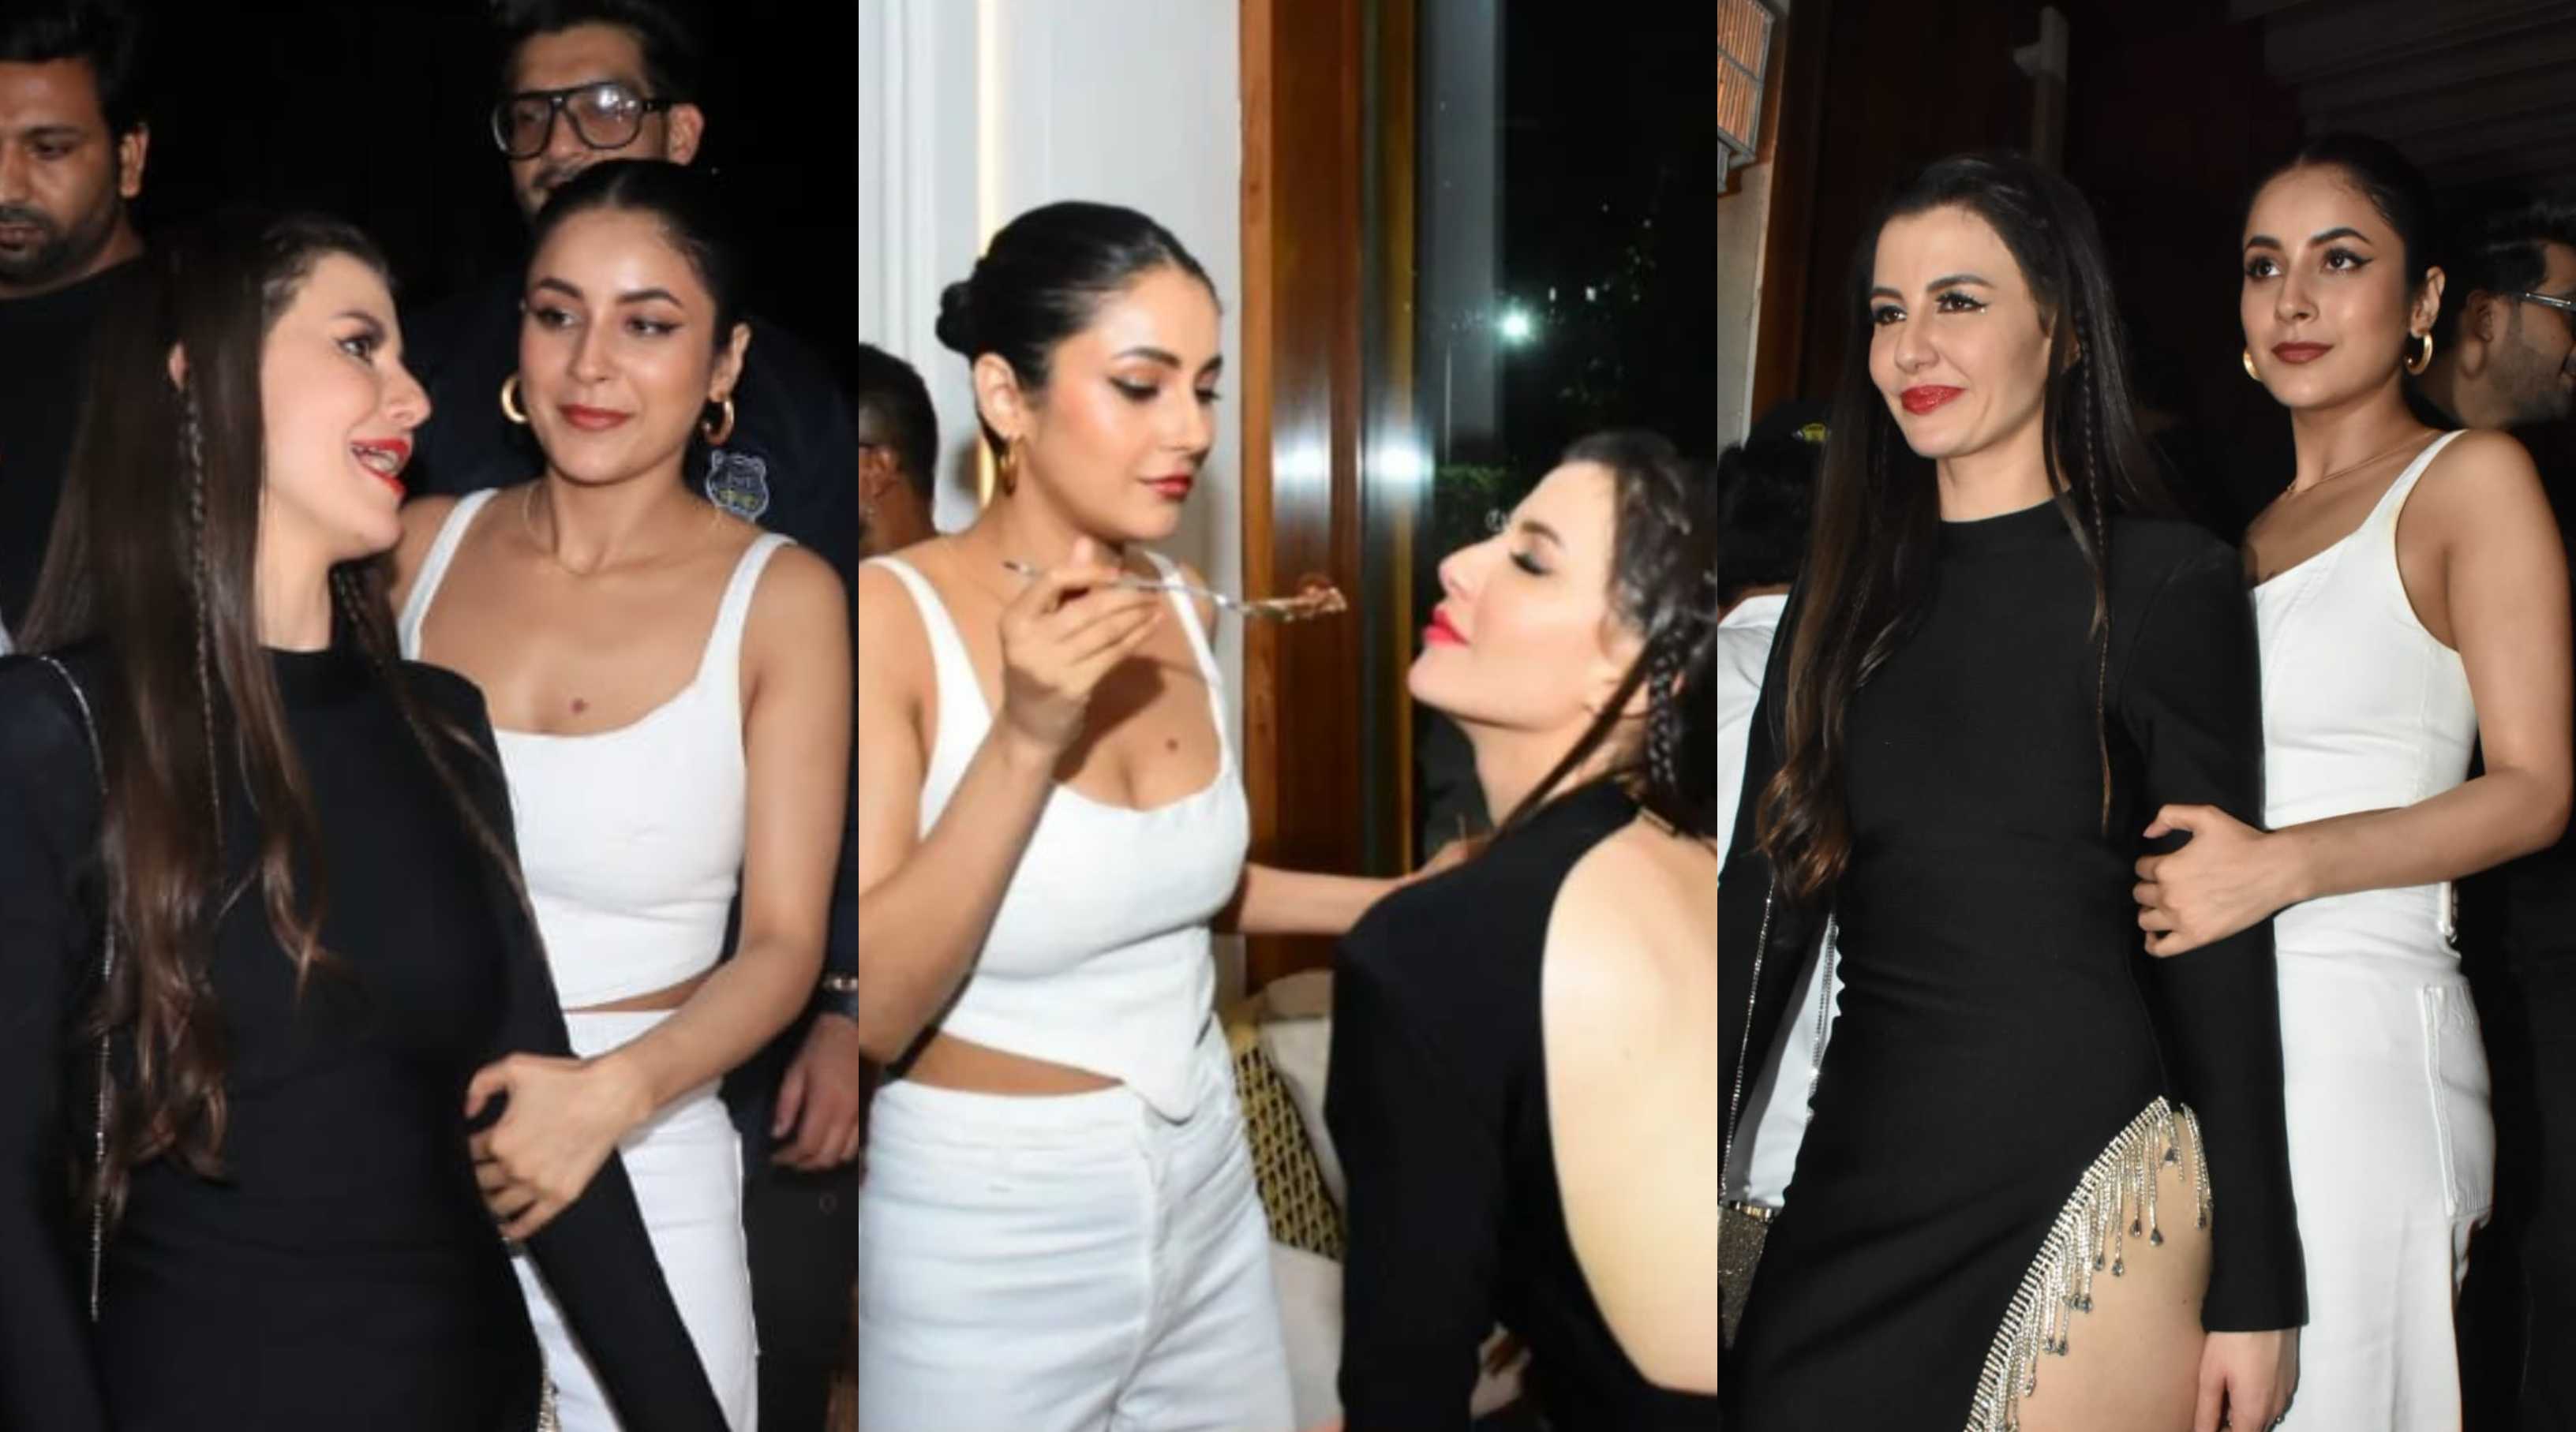 Shehnaaz Gill arrives for Giorgia Andriani’s birthday bash in white co-ords; shares a special message for her fans